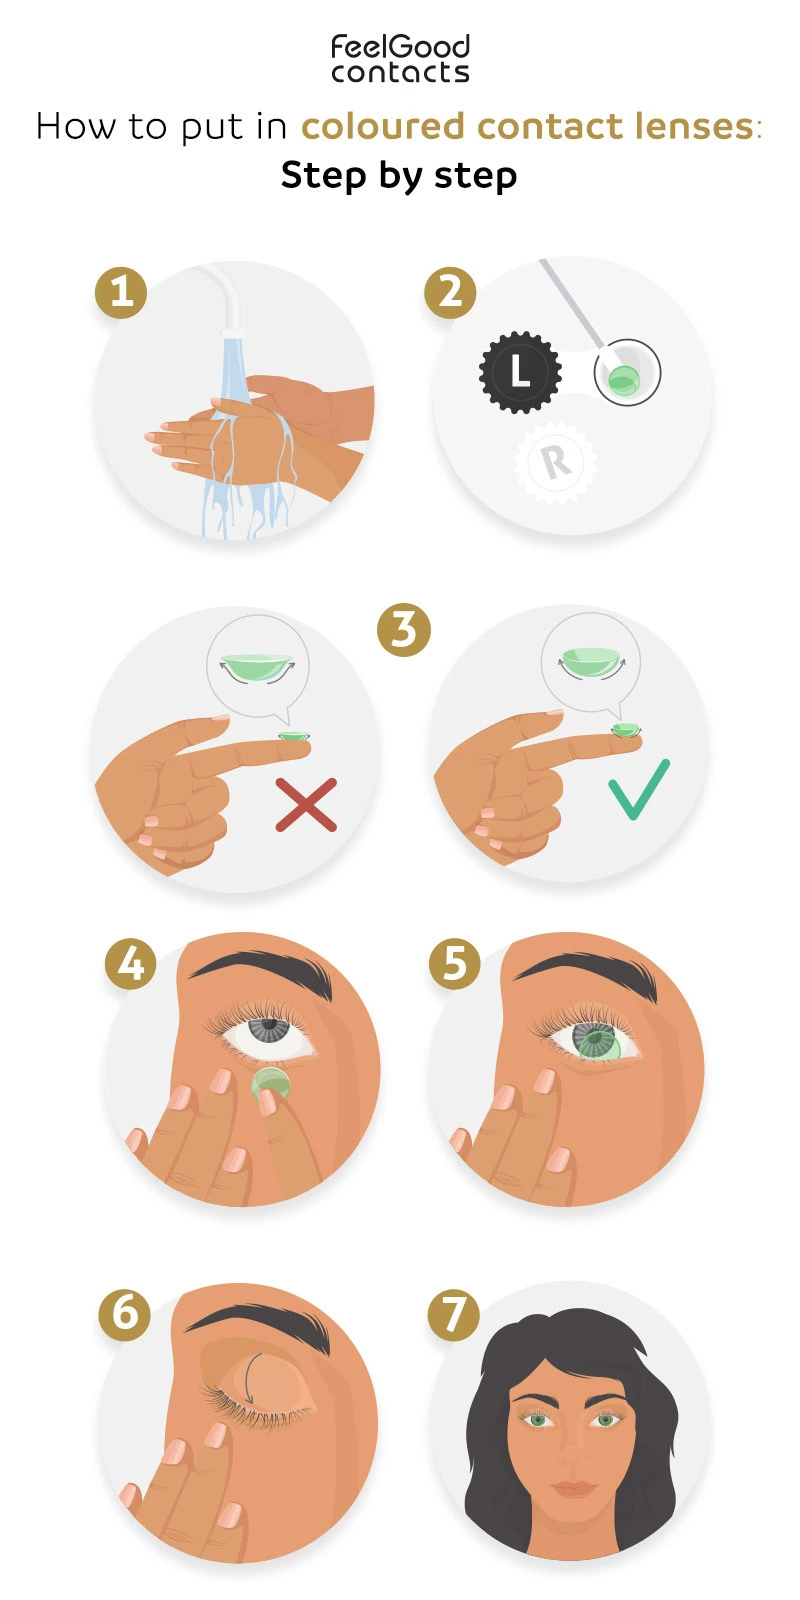 Step by step process to put in coloured contact lenses